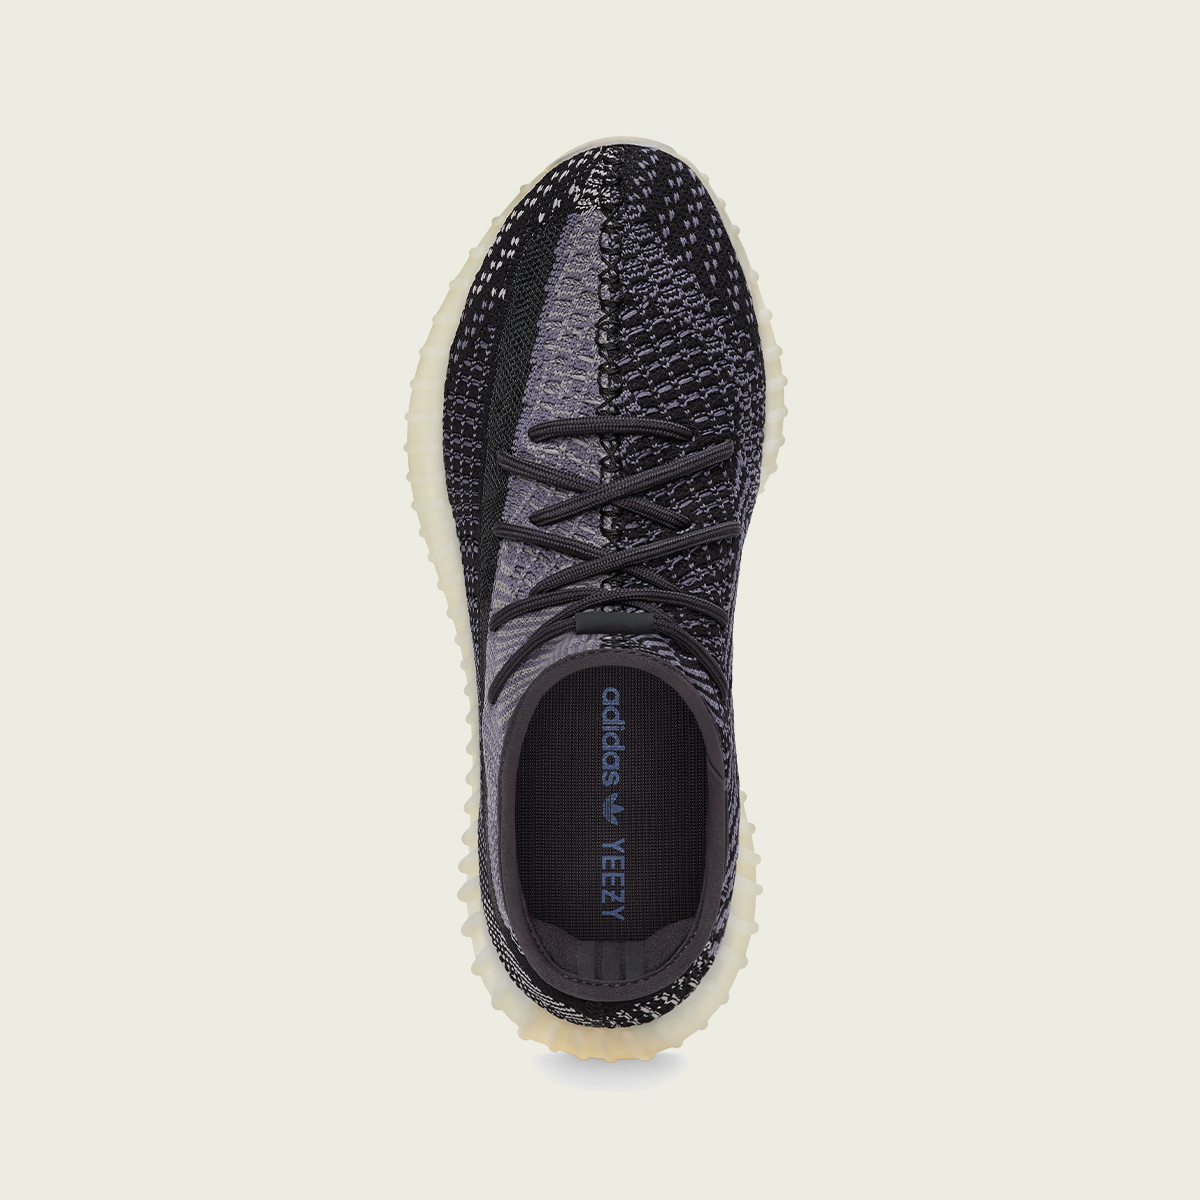 Excelente adolescente Simpático Online Shopping Kuwait | Adidas, Reebok, Nike, Puma & More | Free Delivery  | Easy Exchange & Returns | SNKR YEEZY BOOST 350 V2 CARBON